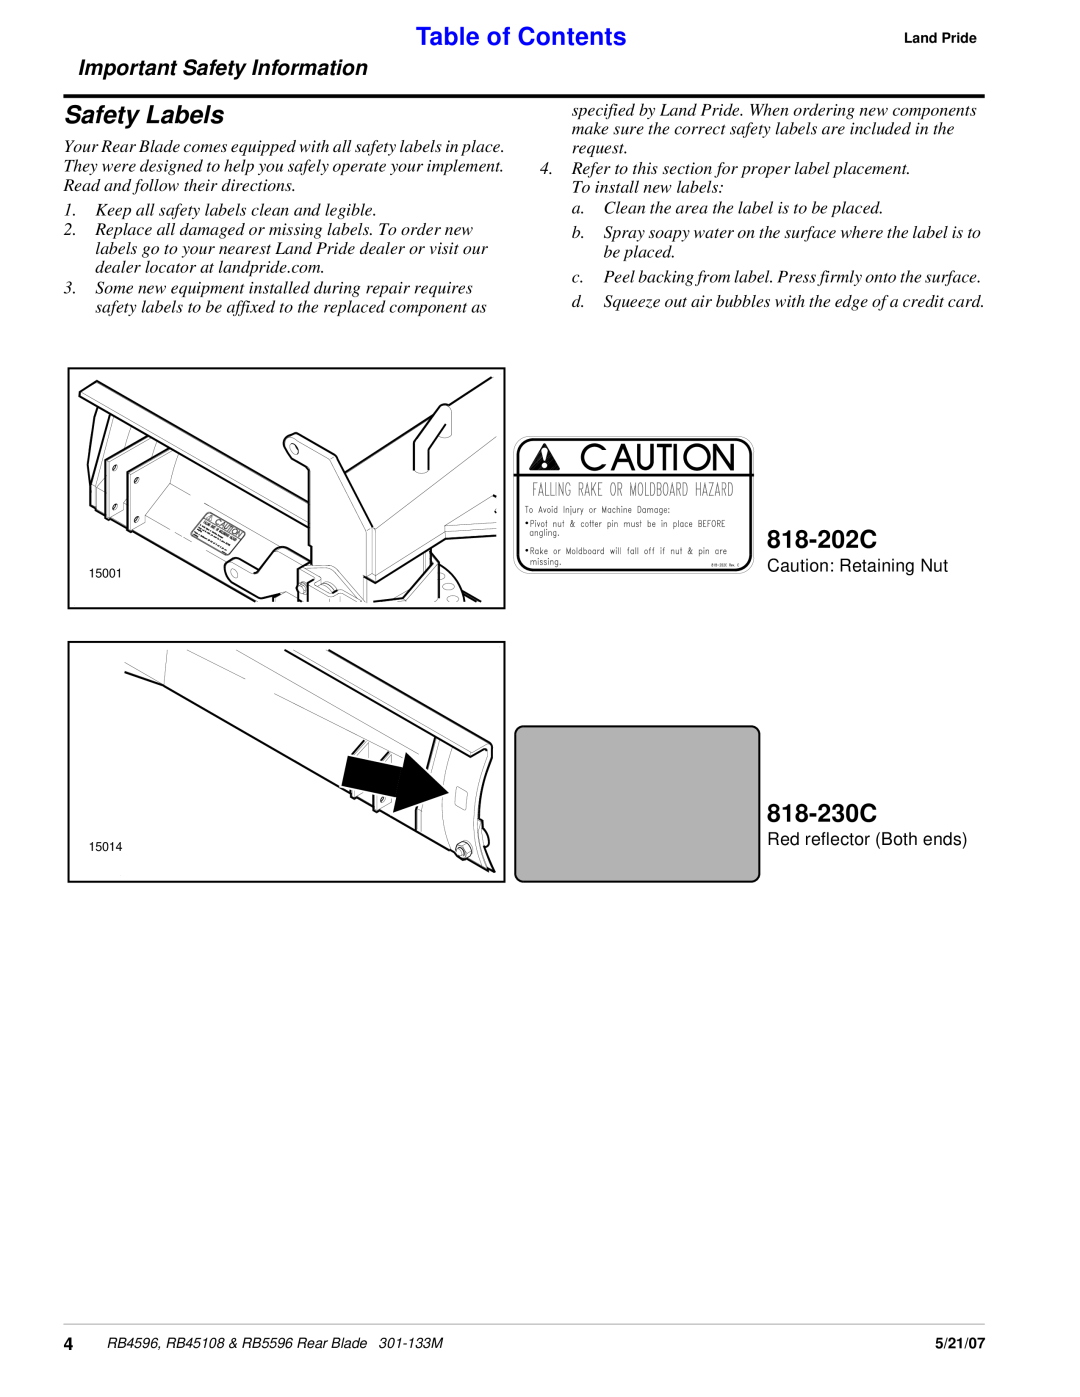 Land Pride RB5596, RB4596, RB45108 manual Safety Labels, 818-202C, 818-230C, Table of Contents, Important Safety Information 